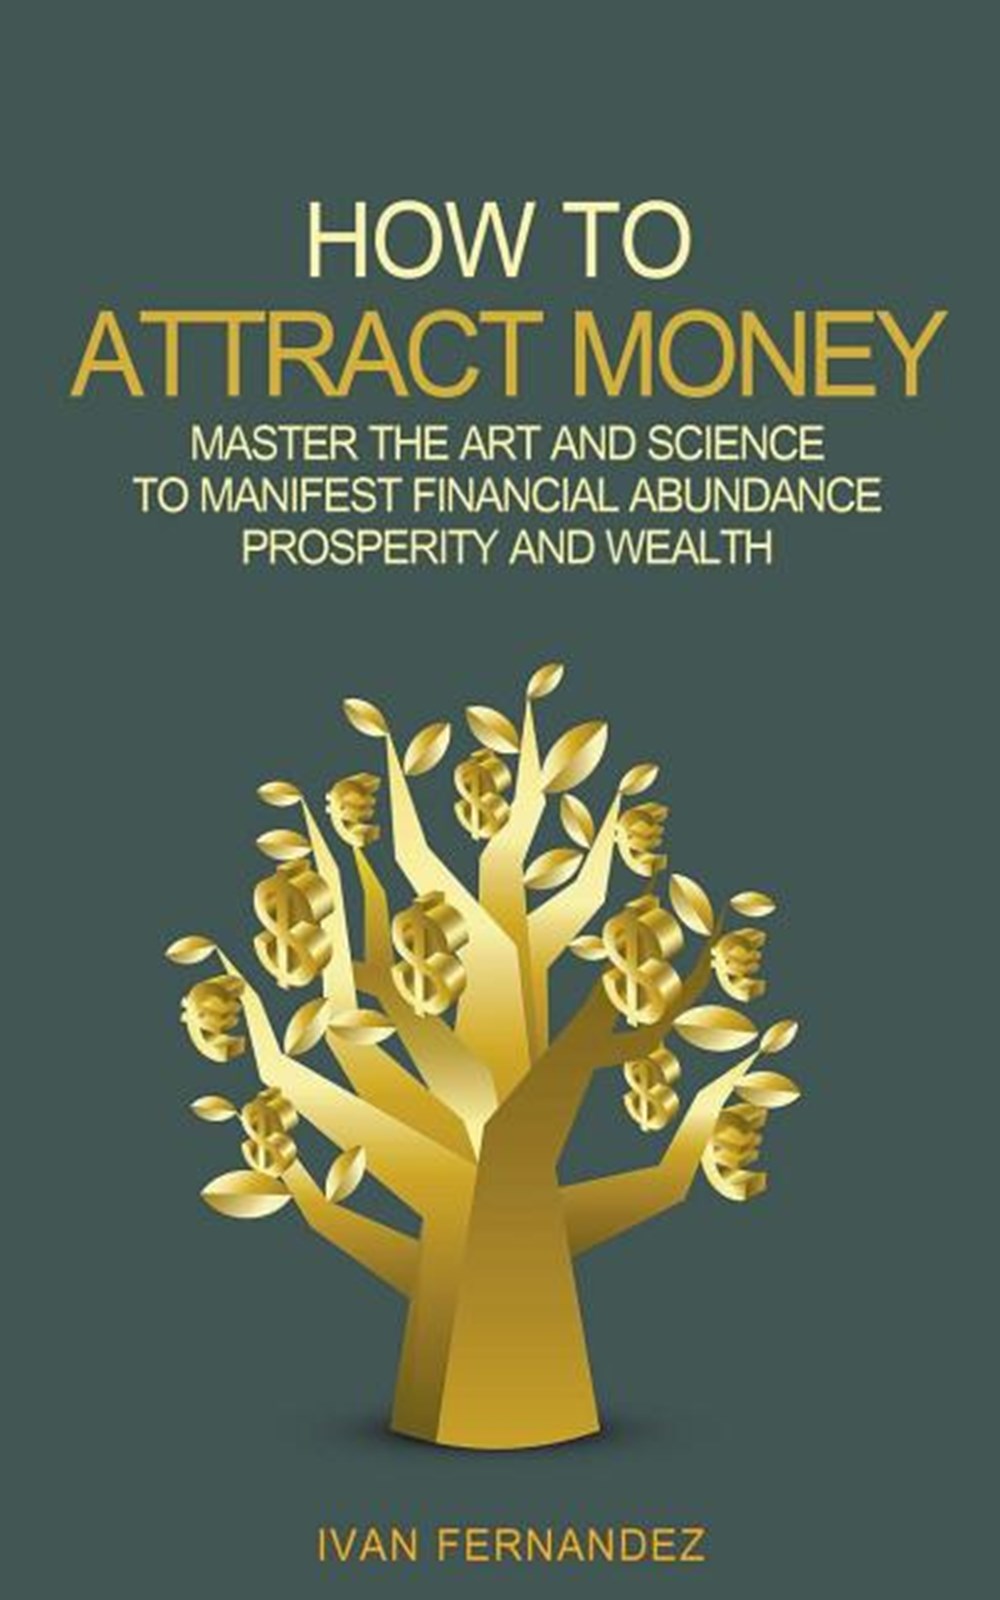 How to Attract Money: Master the Art and Science to Manifest Financial Abundance, Prosperity and Wea